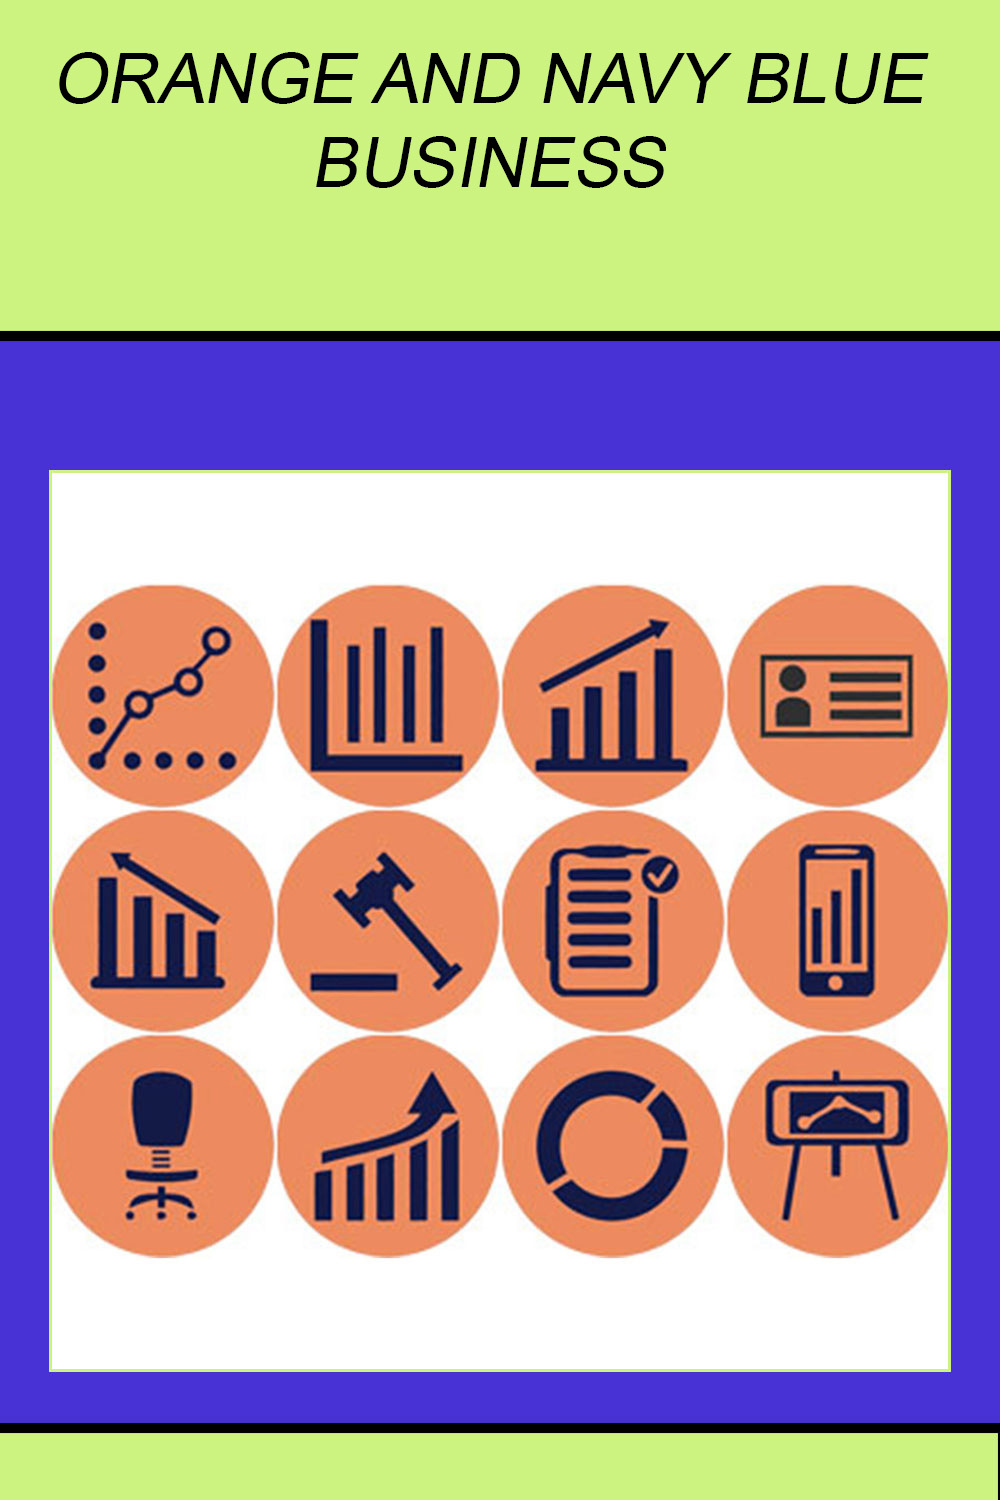 ORANGE AND NAVY BLUE BUSINESS ROUND ICONS pinterest preview image.